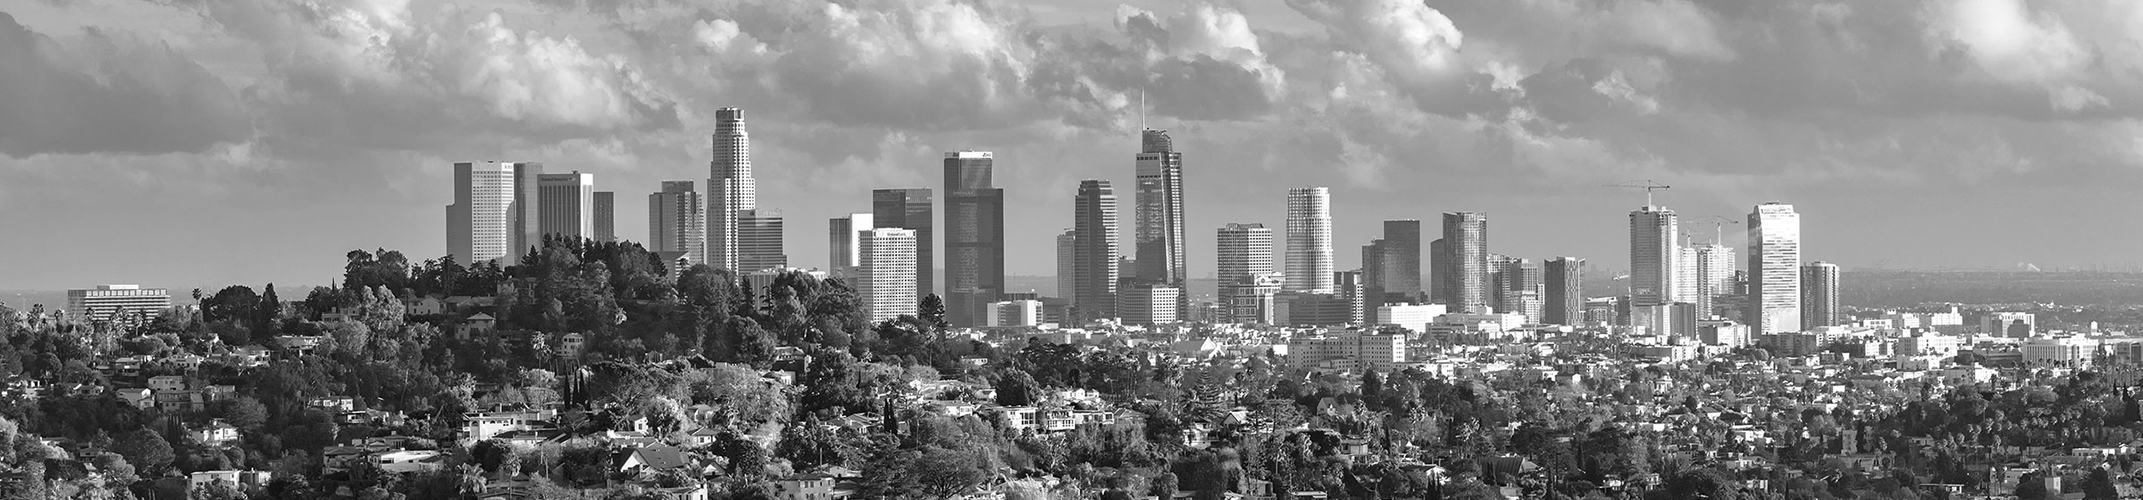 A city skyline view of Los Angeles